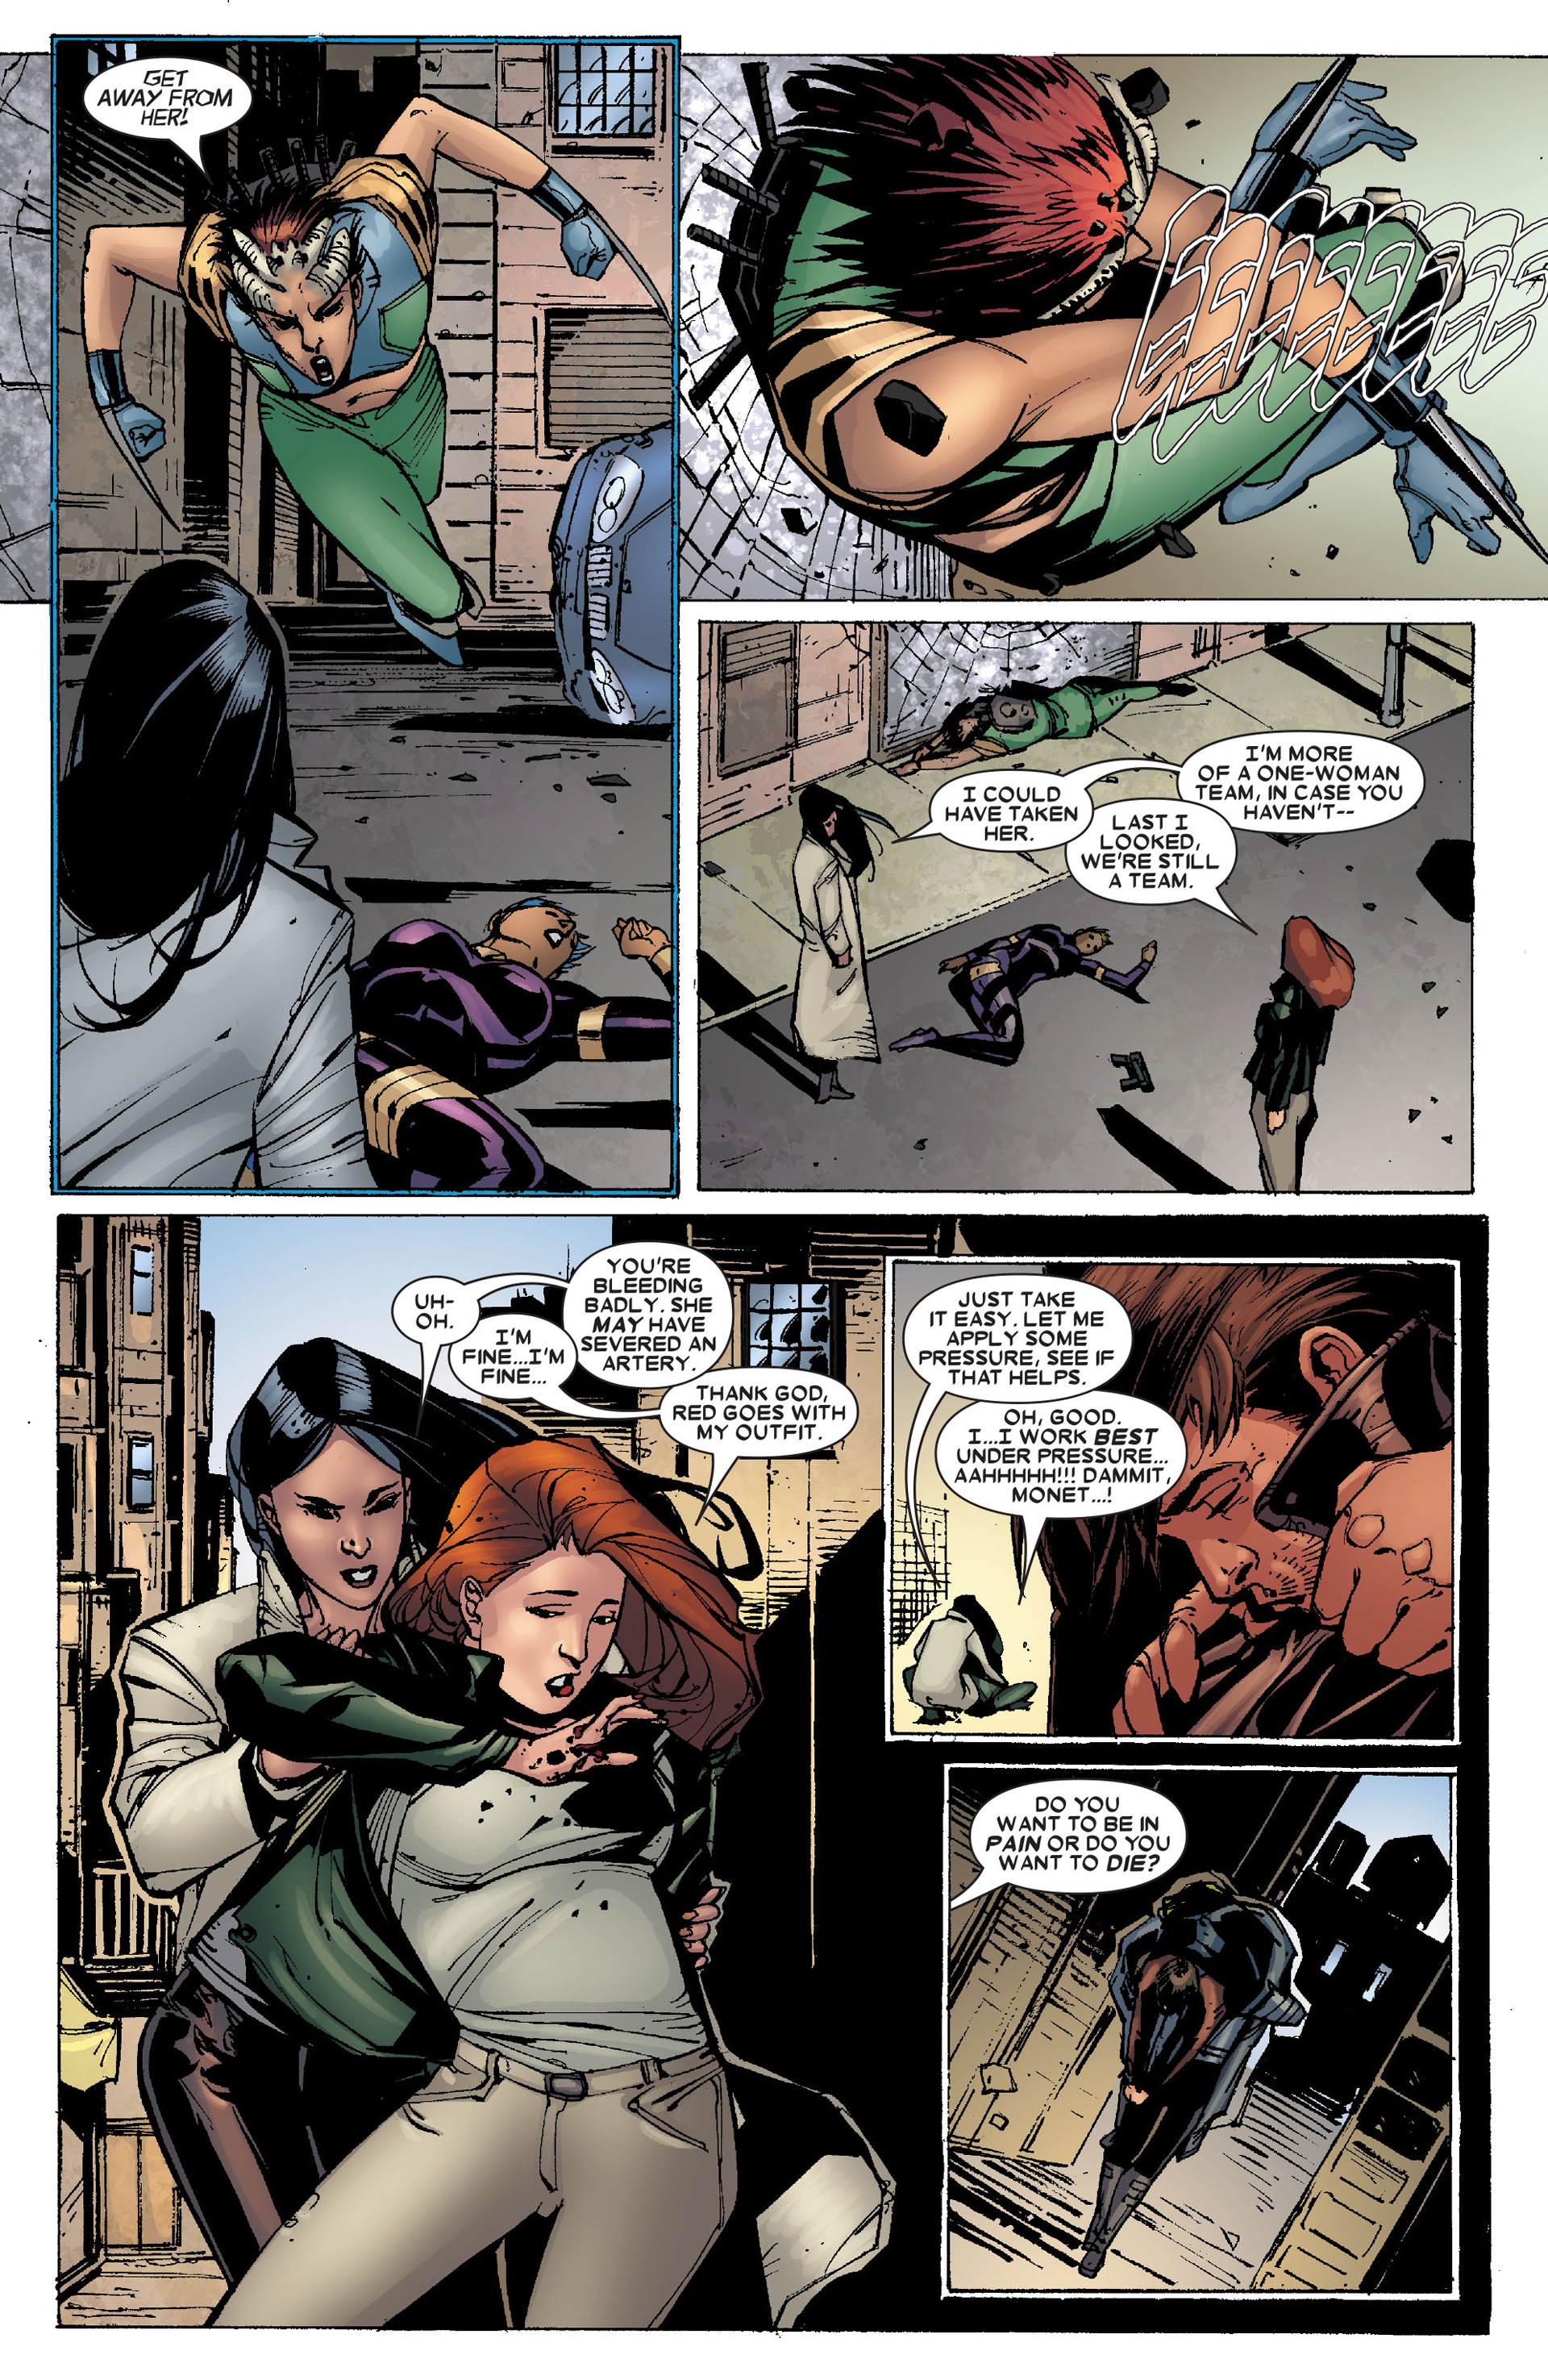 X-Factor (2006) 19 Page 12